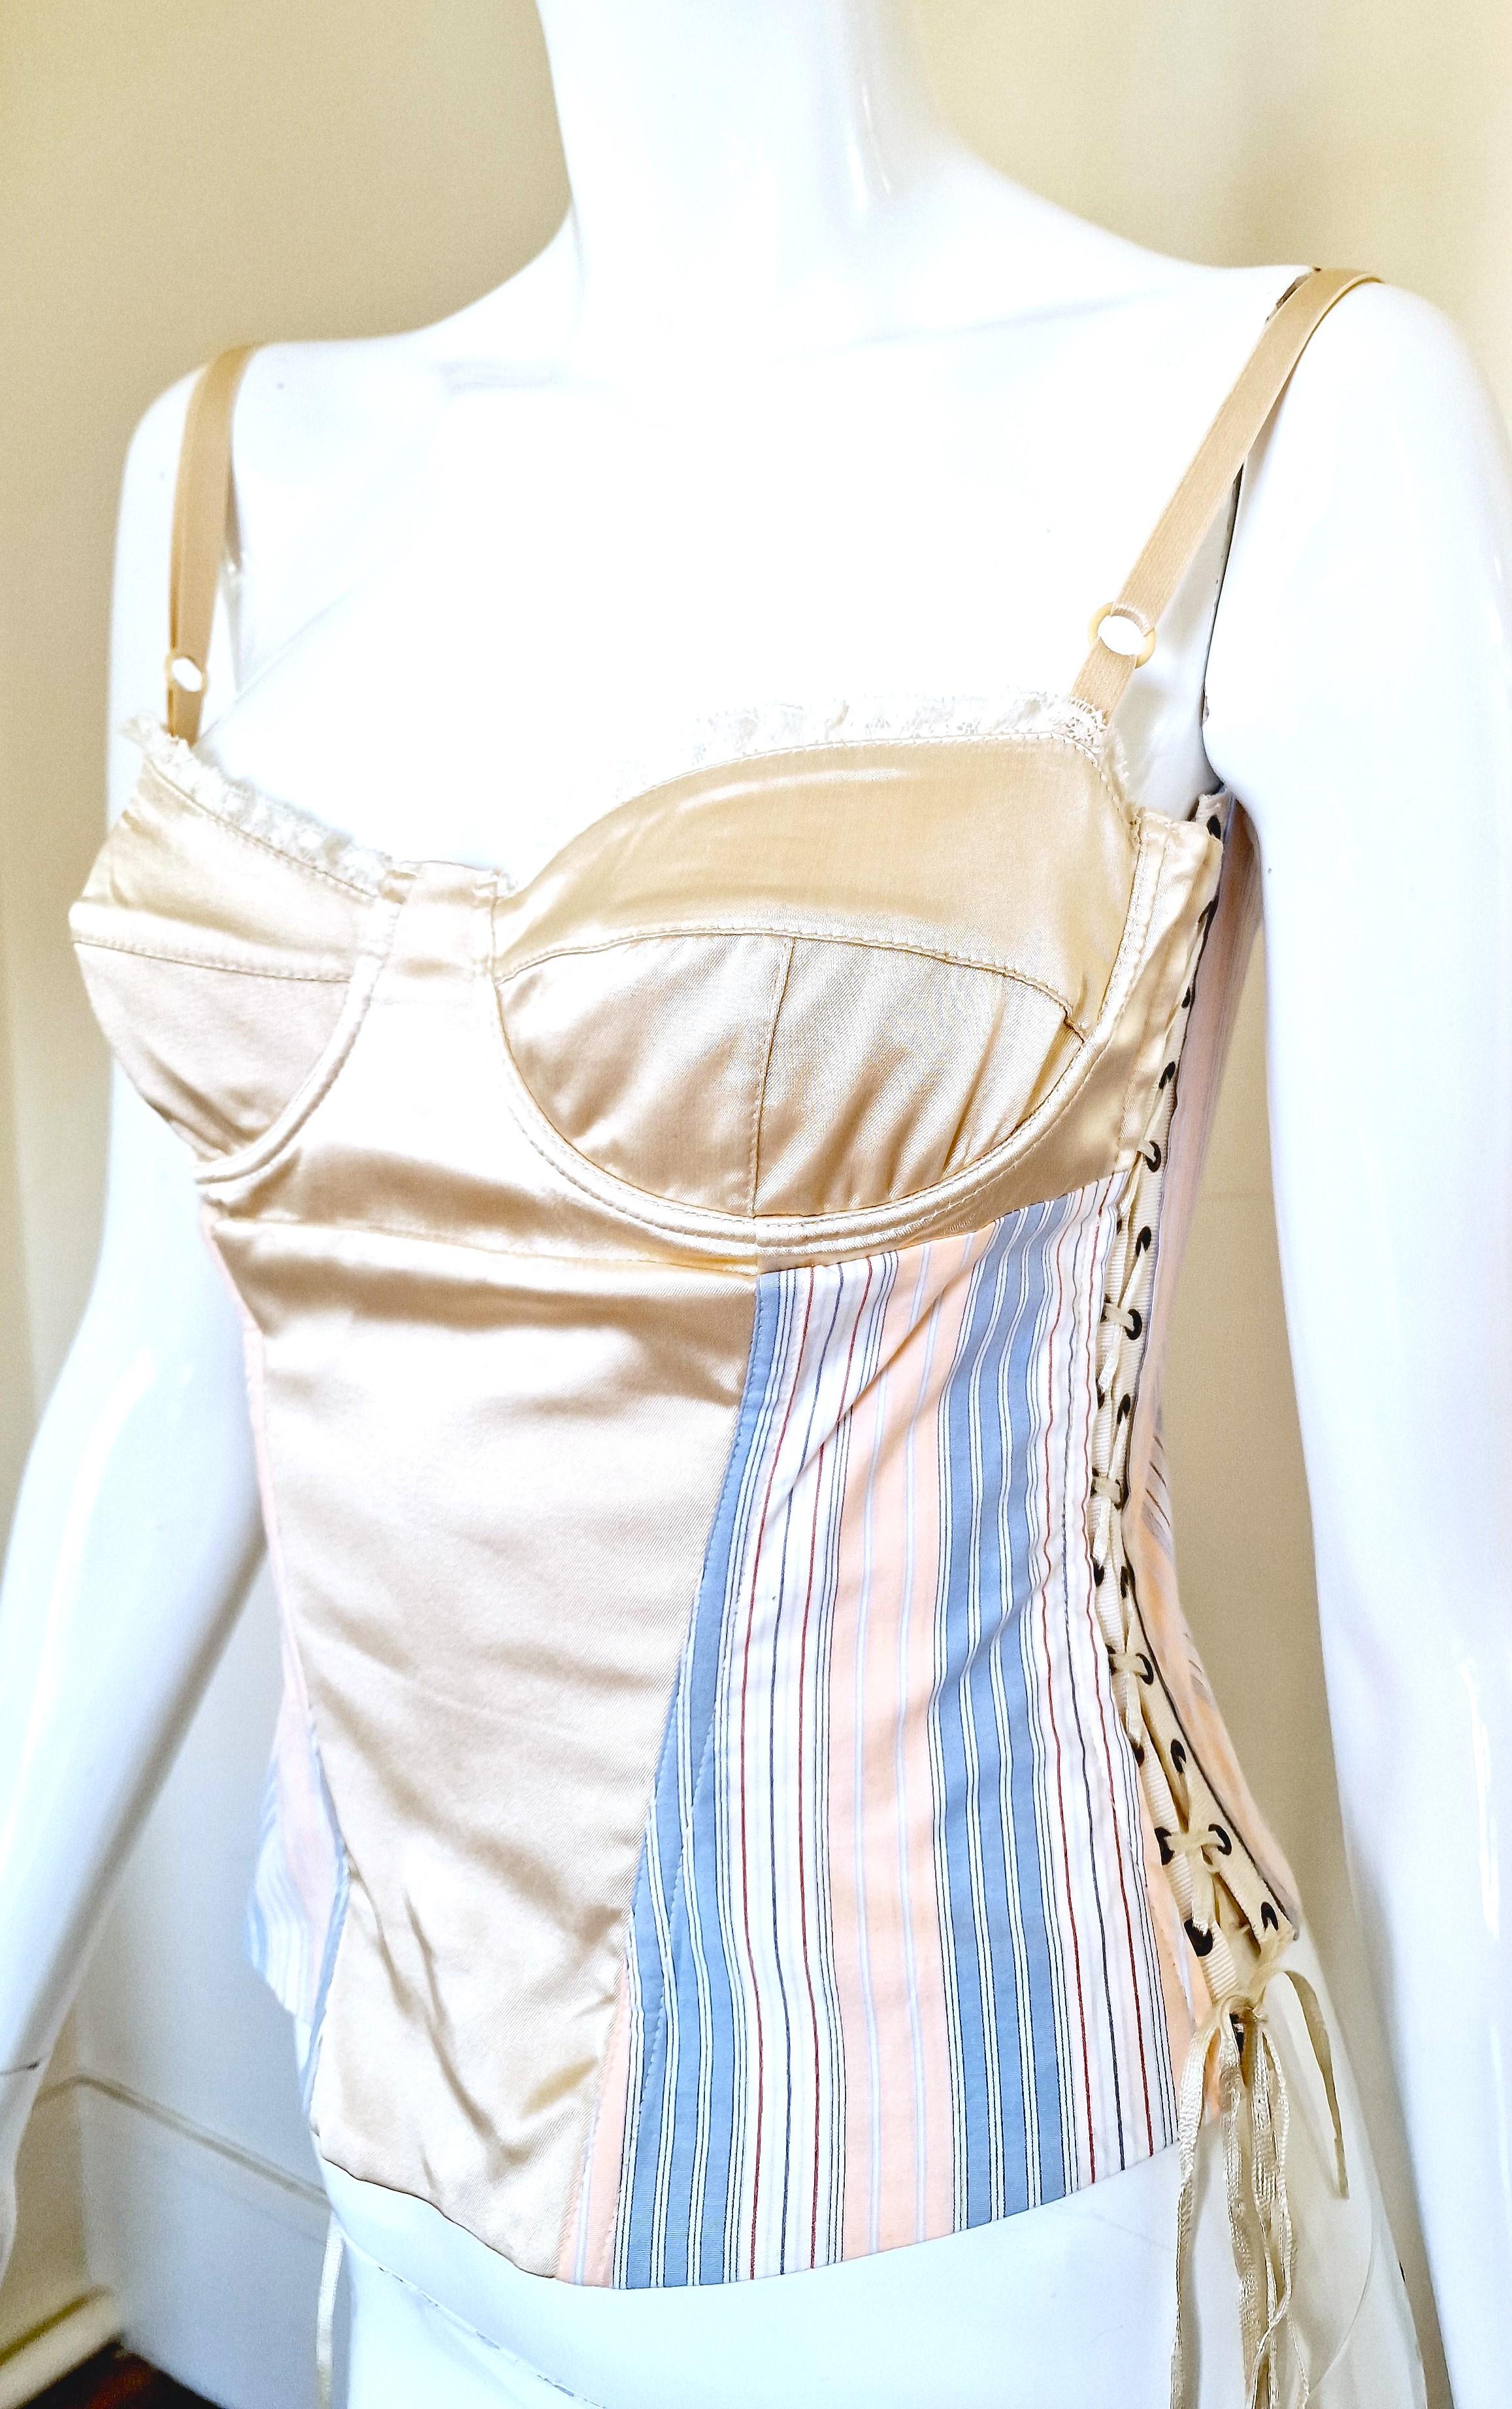 D&G Dolce and Gabbana Striped Bustier Lace Up Vintage Medium Rose Top Corset For Sale 2